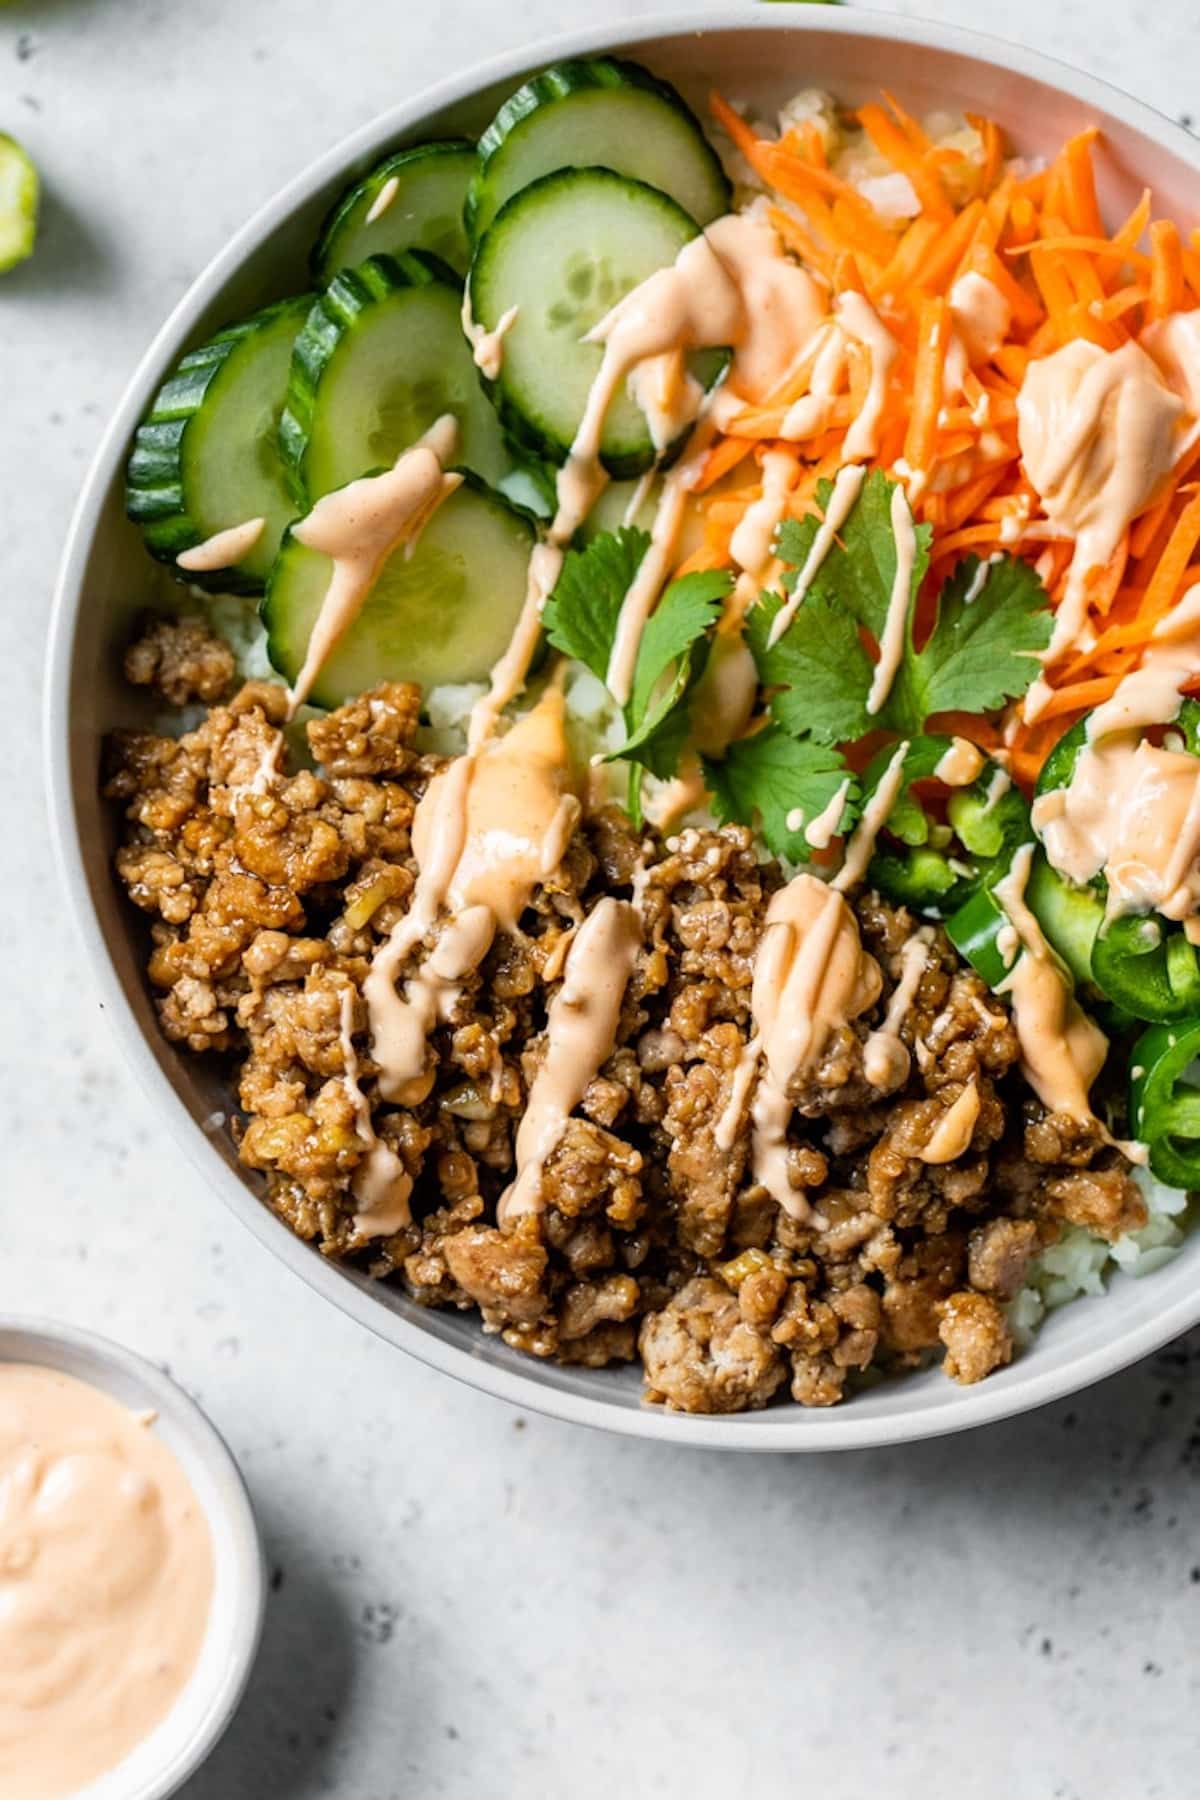 Banh mi bowl with cucumber, carrots, and ground beef in a bowl with sauce.